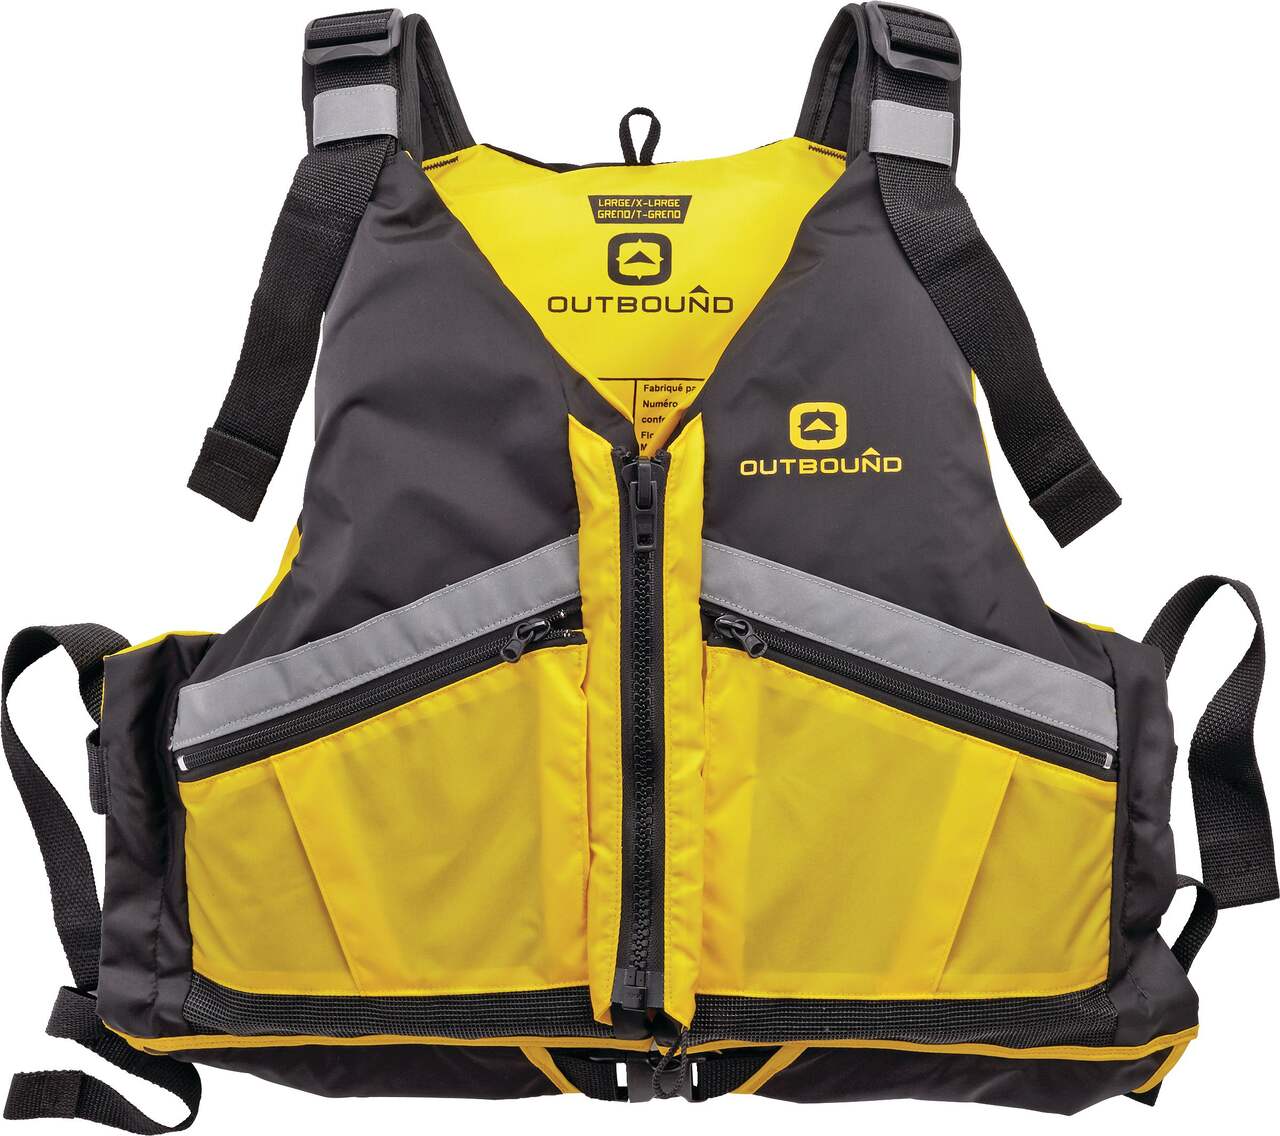 Fluid Deluxe Adult Nylon PFD/Life Jacket, Assorted Colours, Large